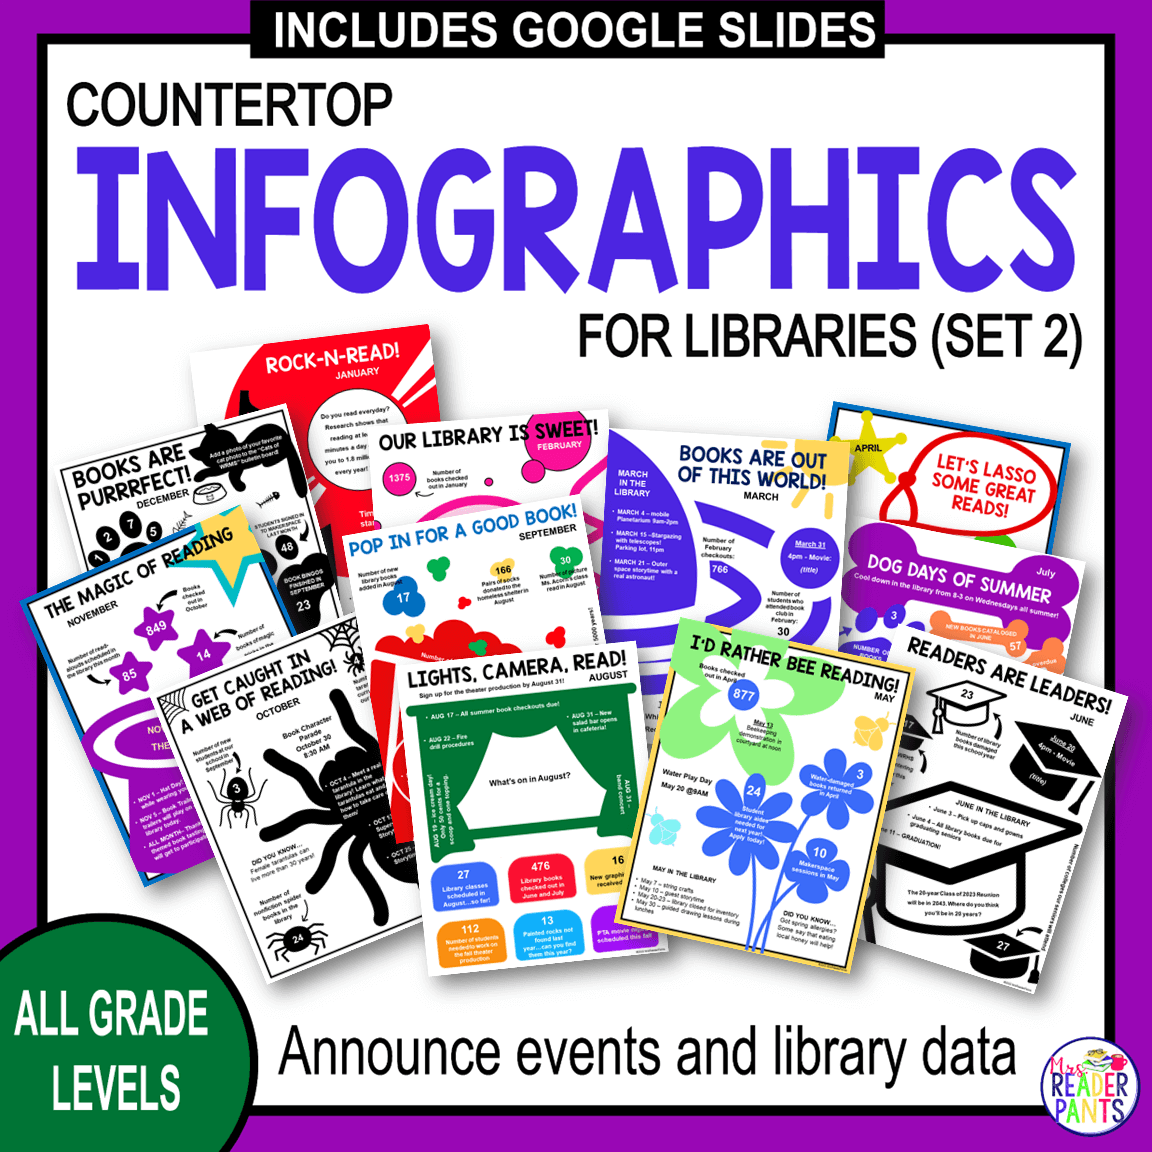 This is the second set of Library Infographics. They are great for communicating library events and statistics with patrons.